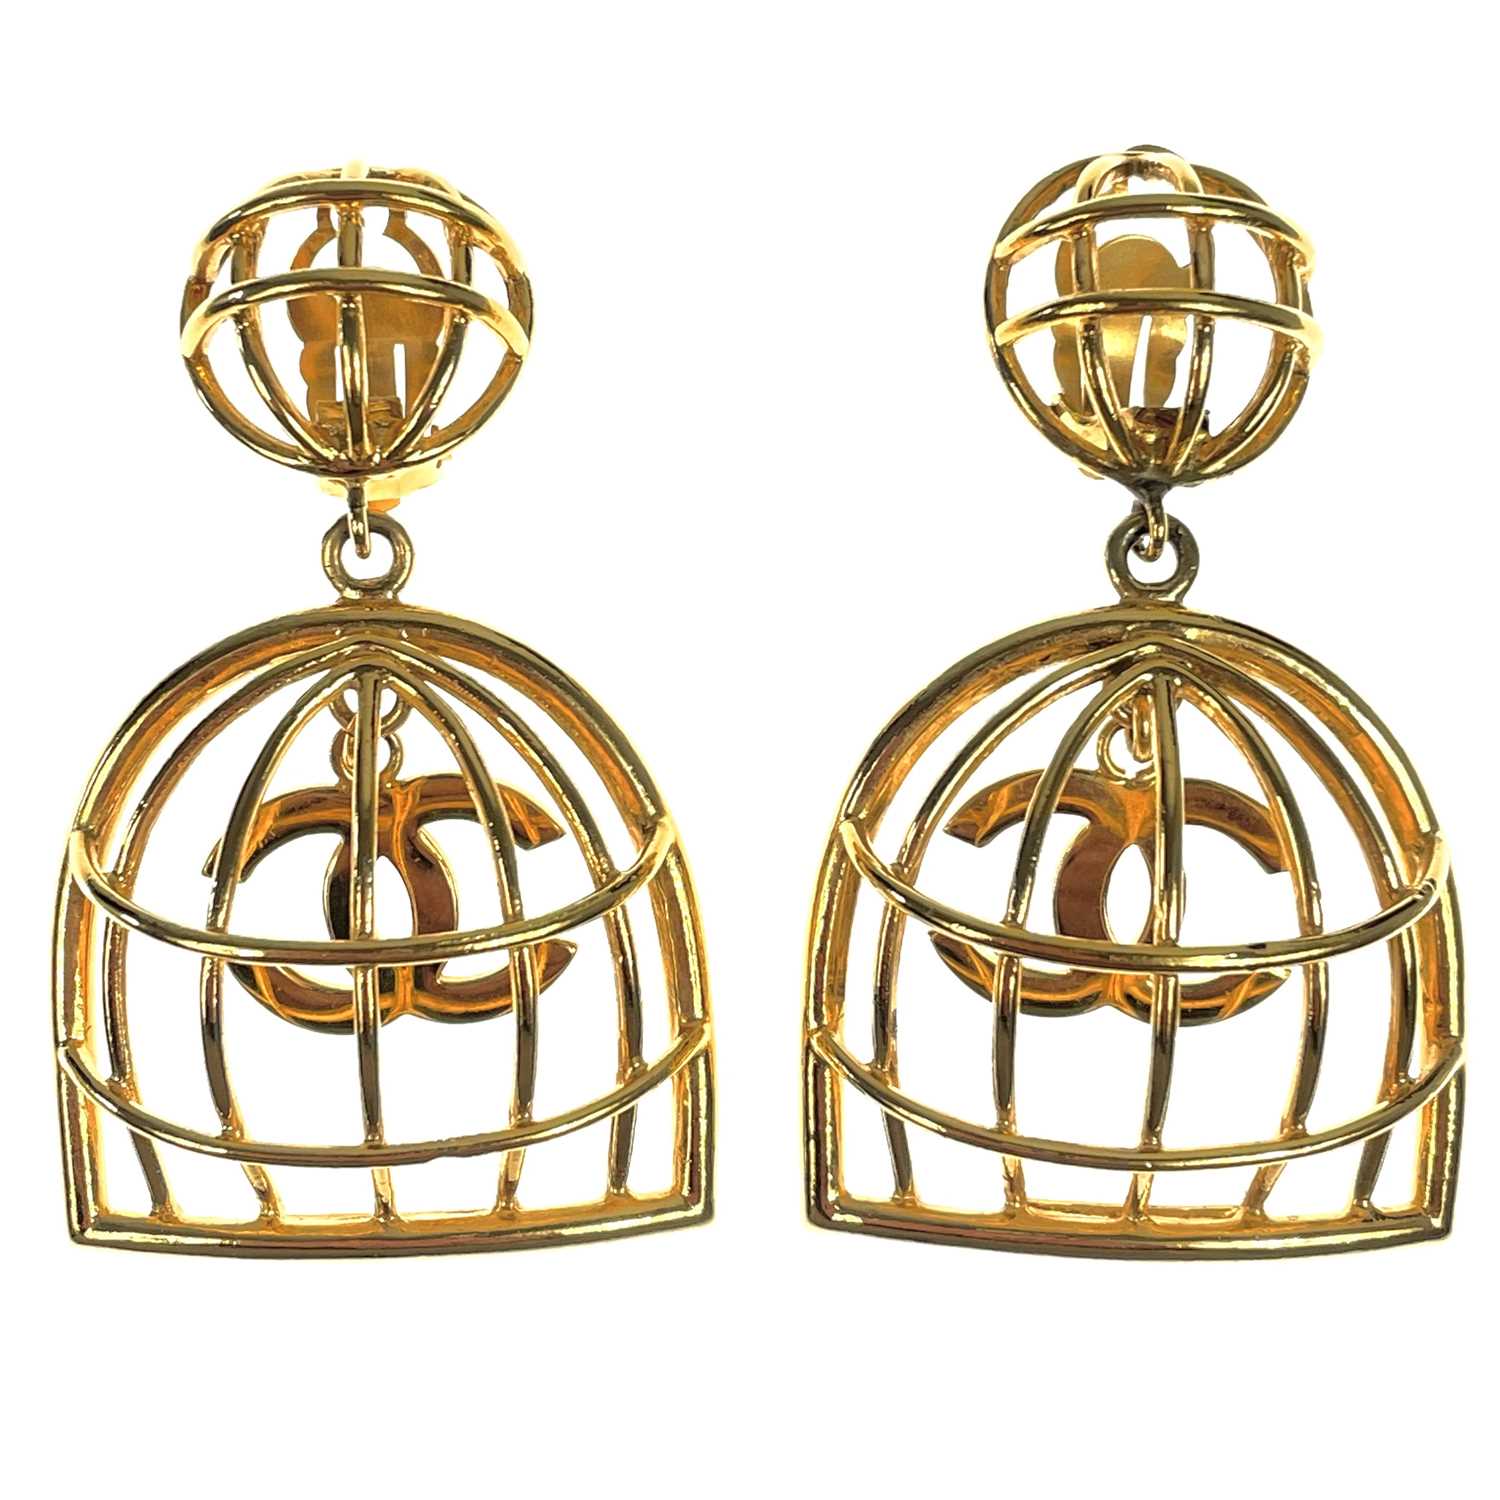 Chanel Cc Logos Birdcage Dangle Earrings Clip On Gold Plate 93p